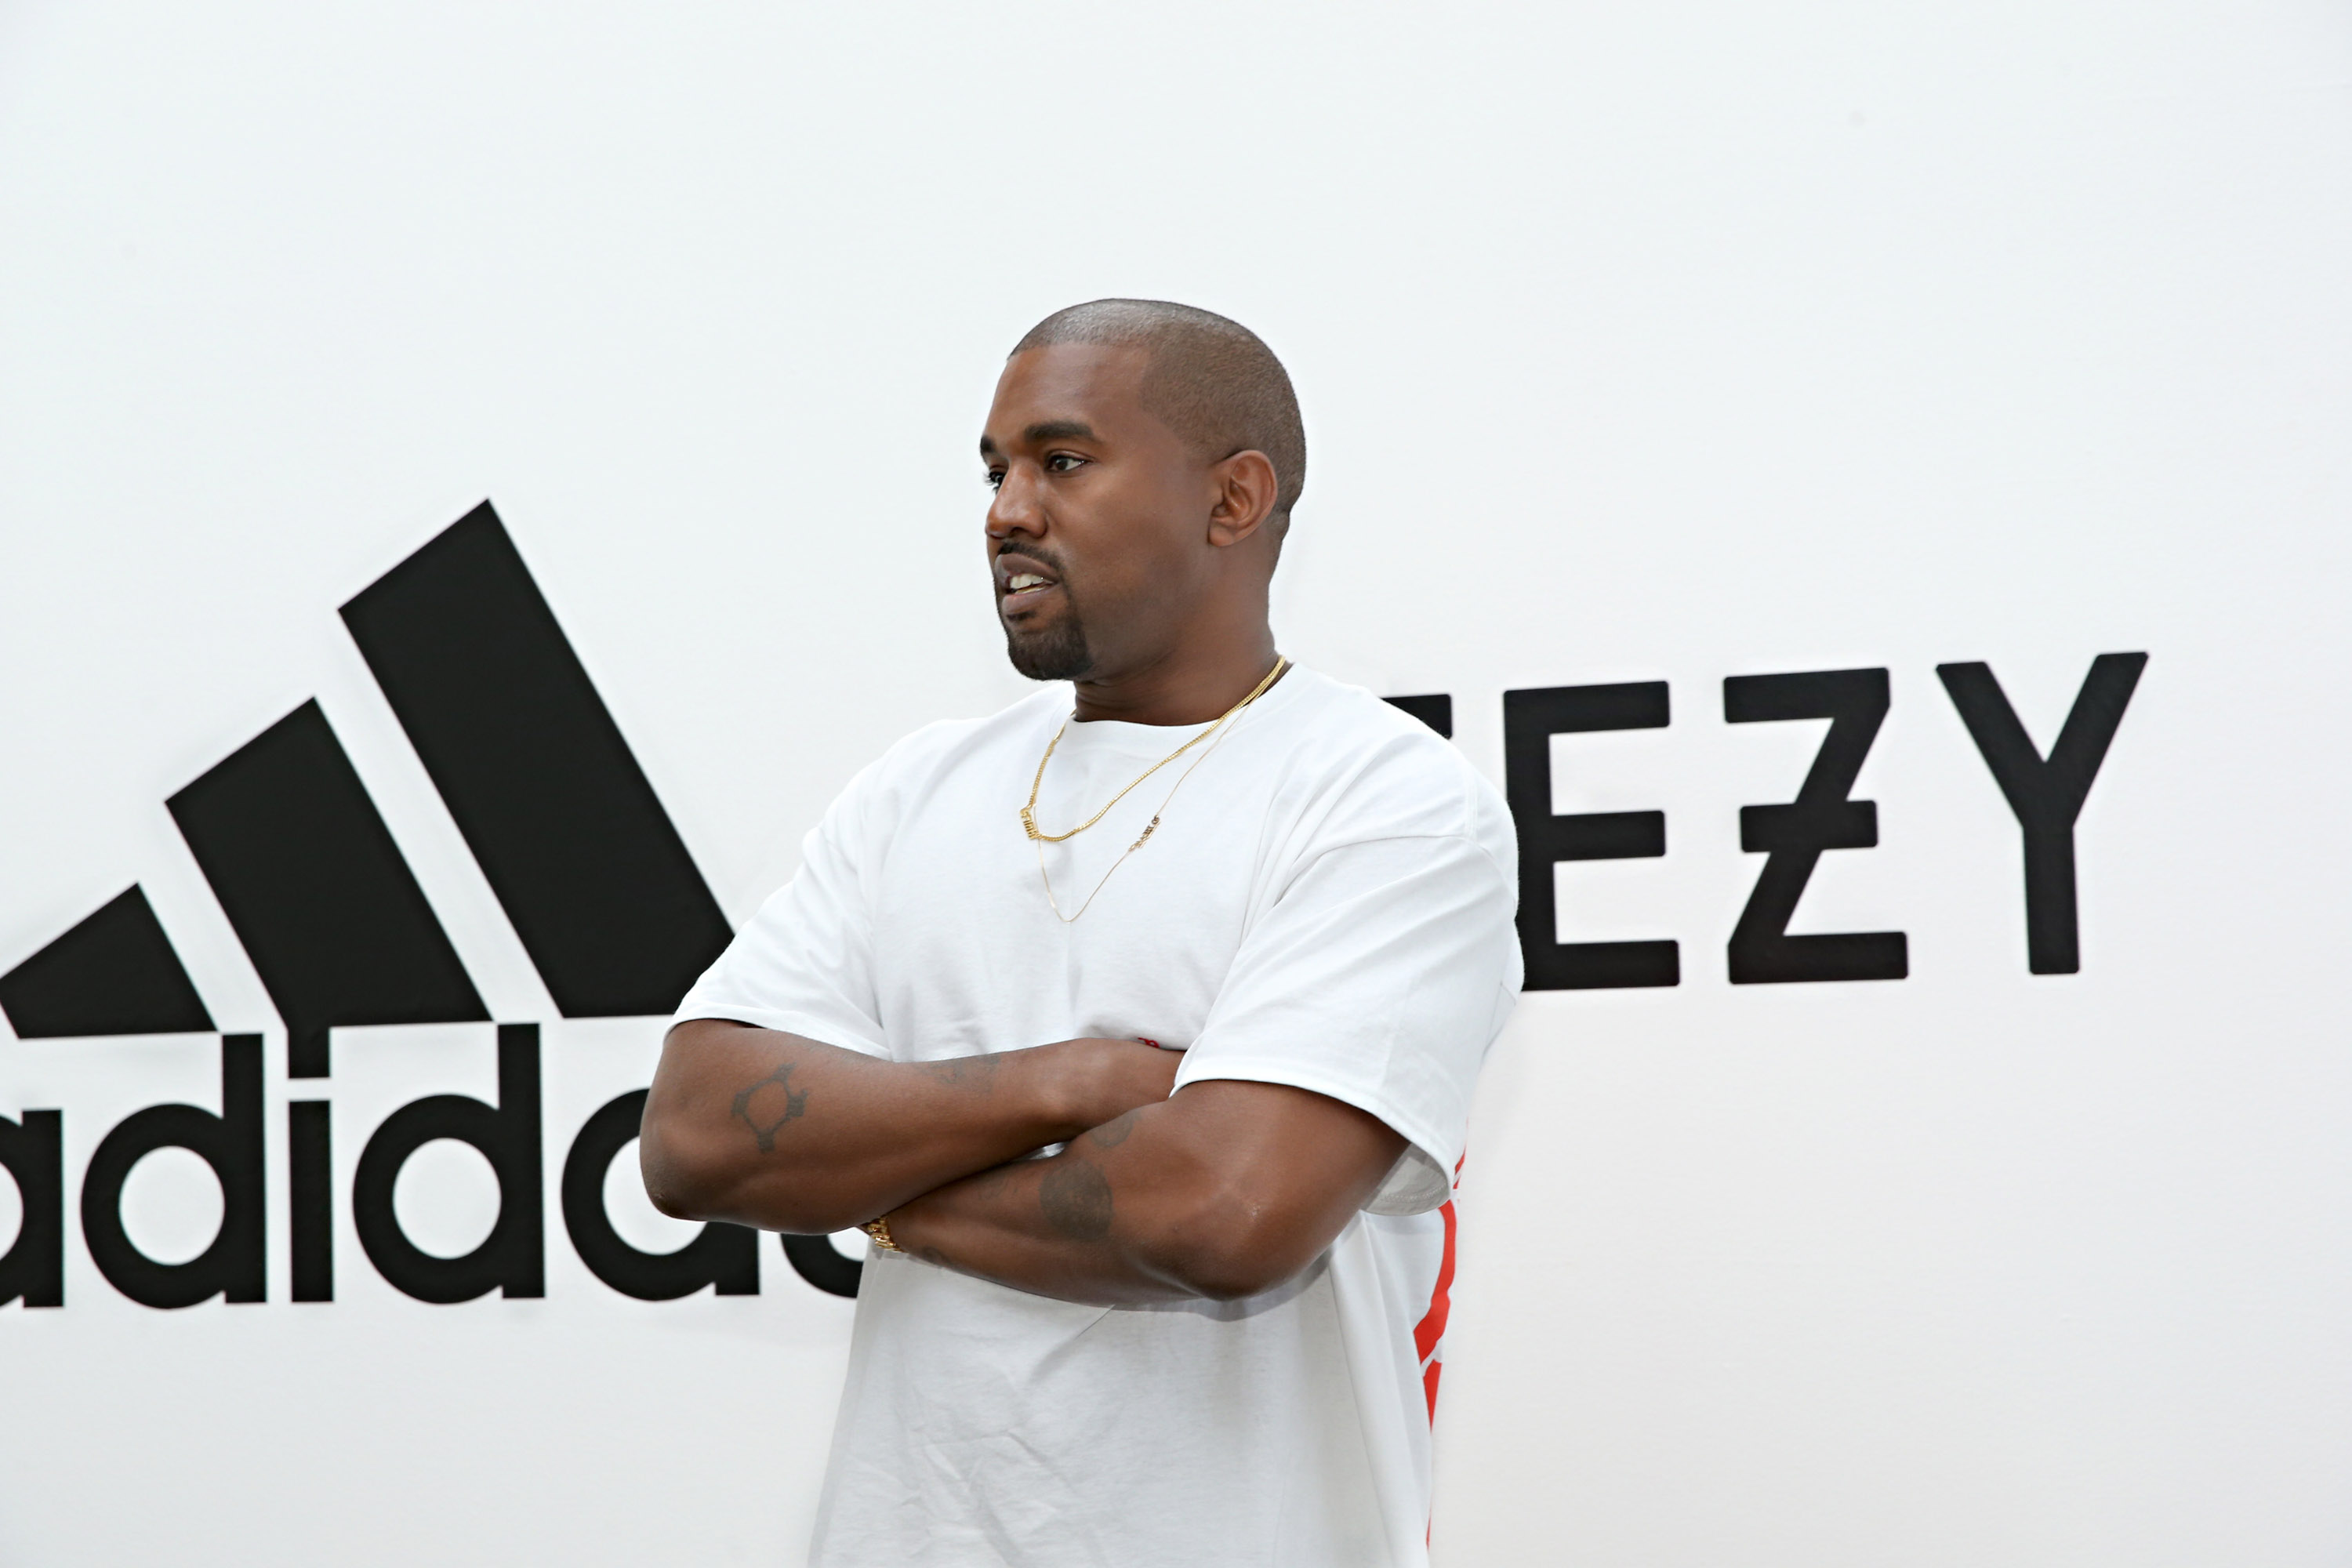 Adidas Cuts Ties With Kanye. What That Means for Company | Time